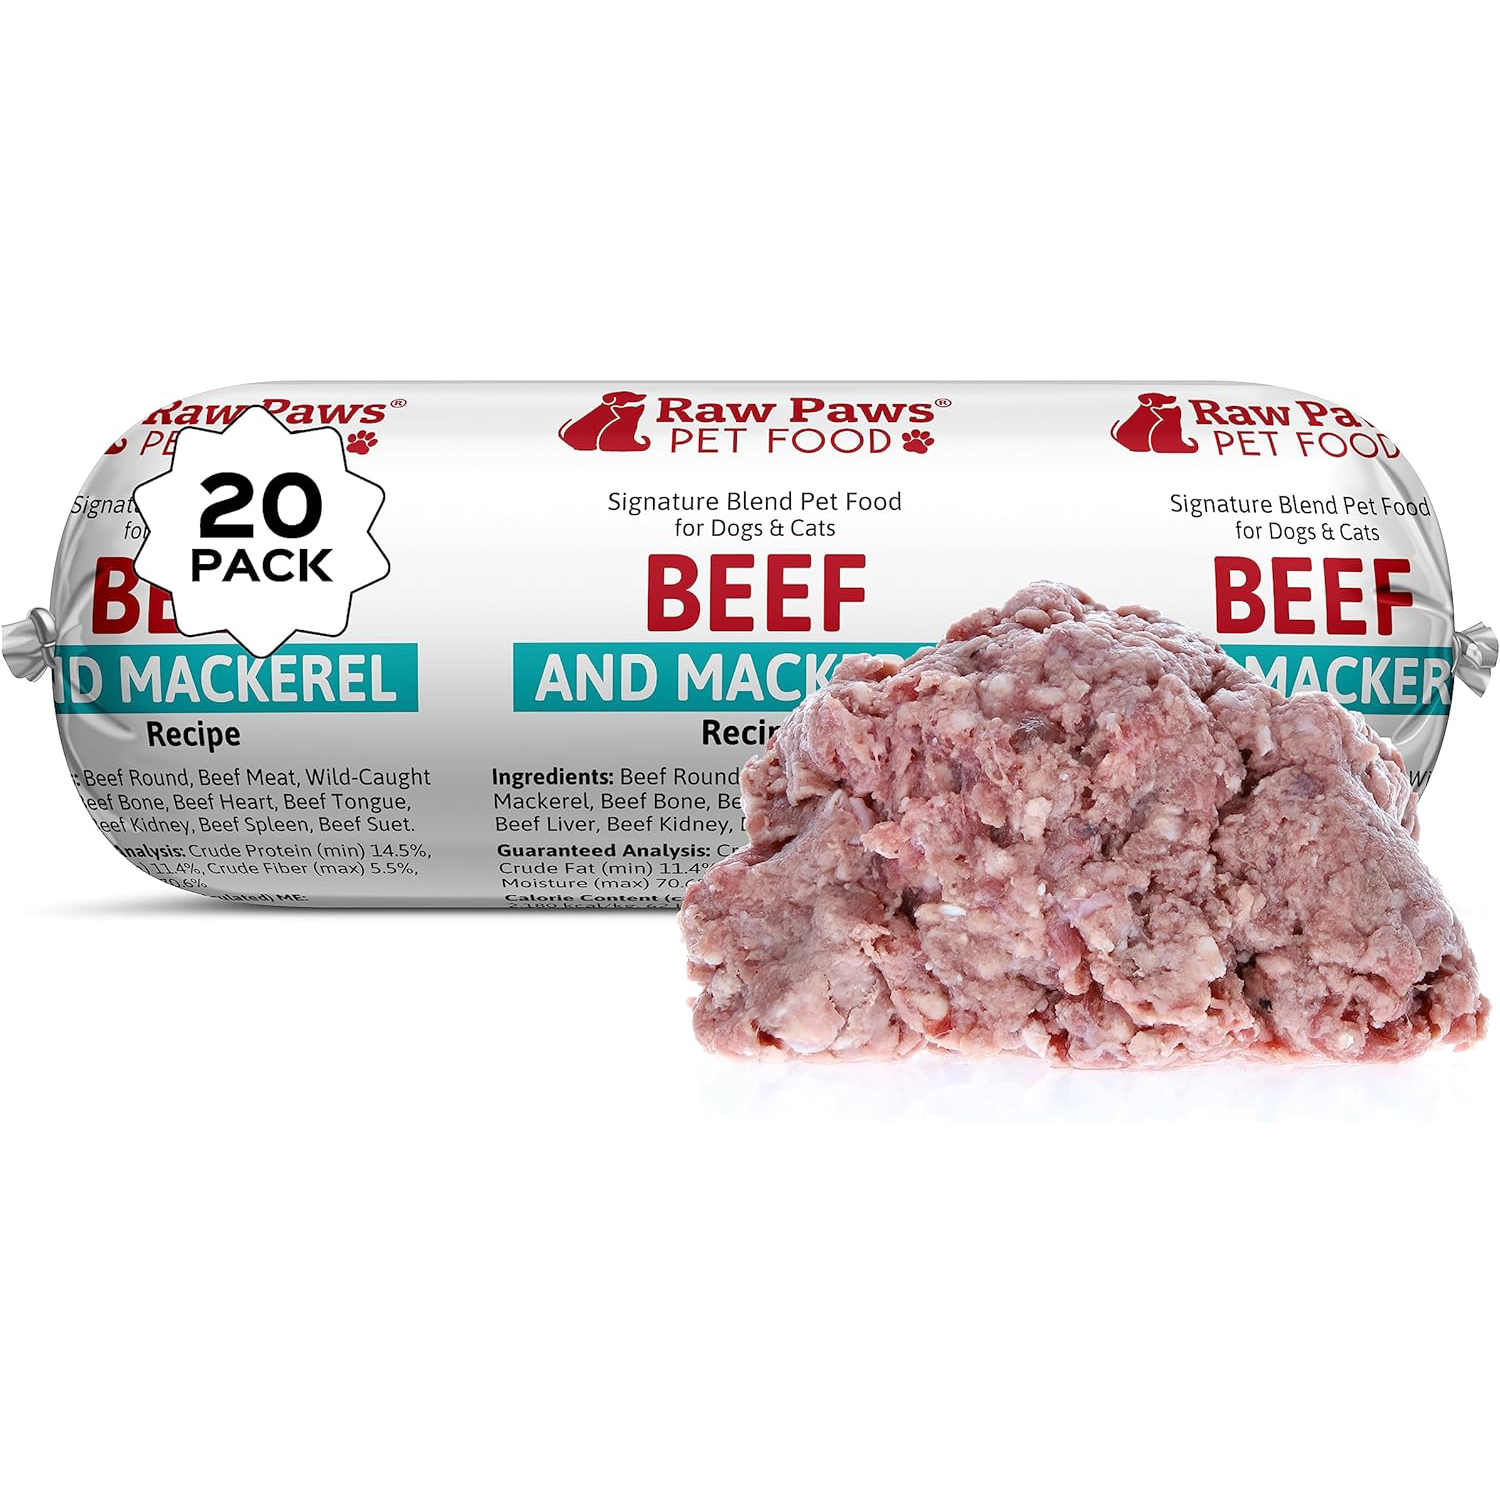 Raw Paws Beef and Mackarel